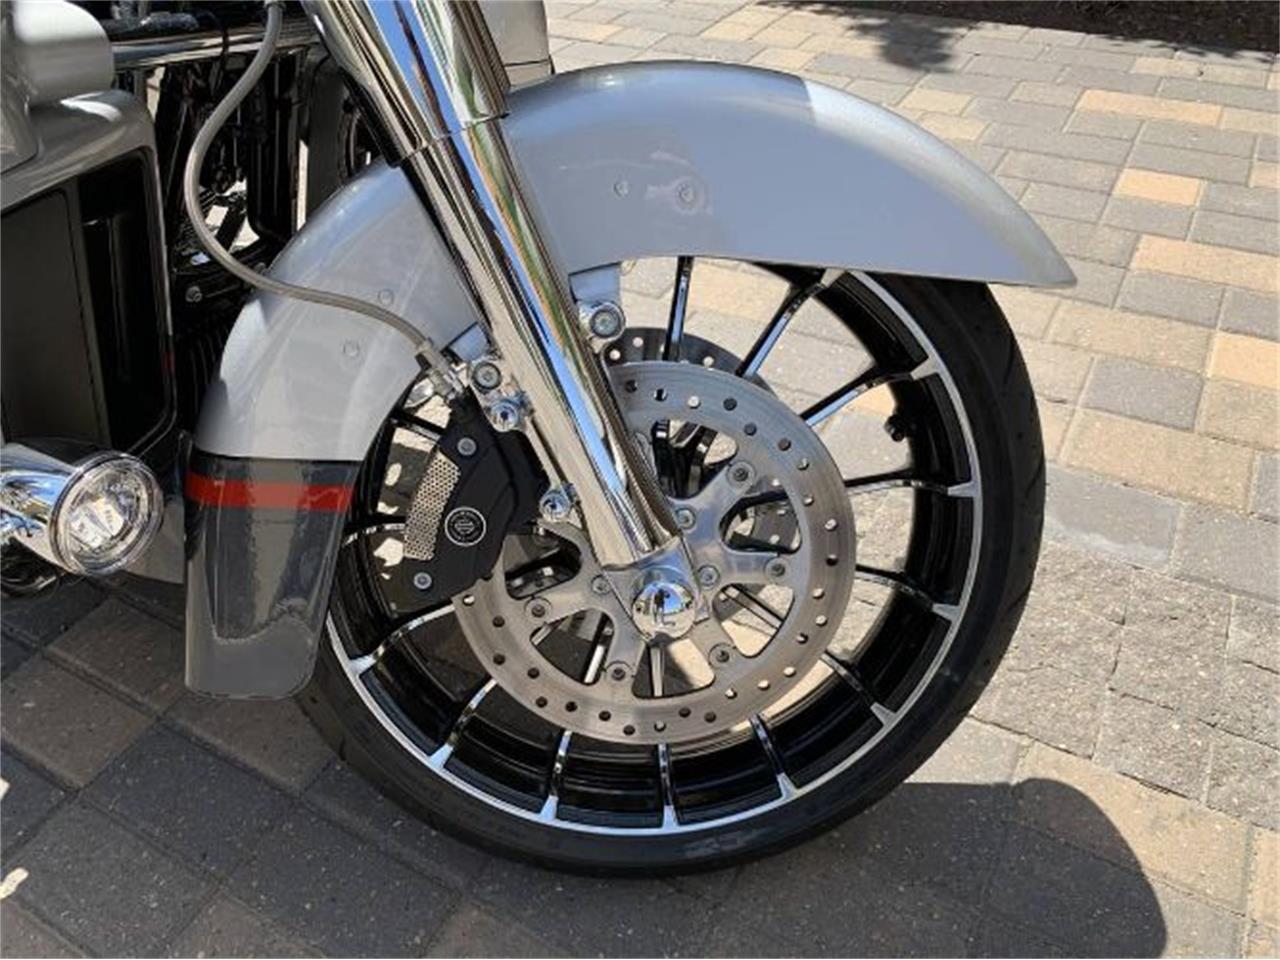 2019 Harley-Davidson Motorcycle for sale in Cadillac, MI – photo 5